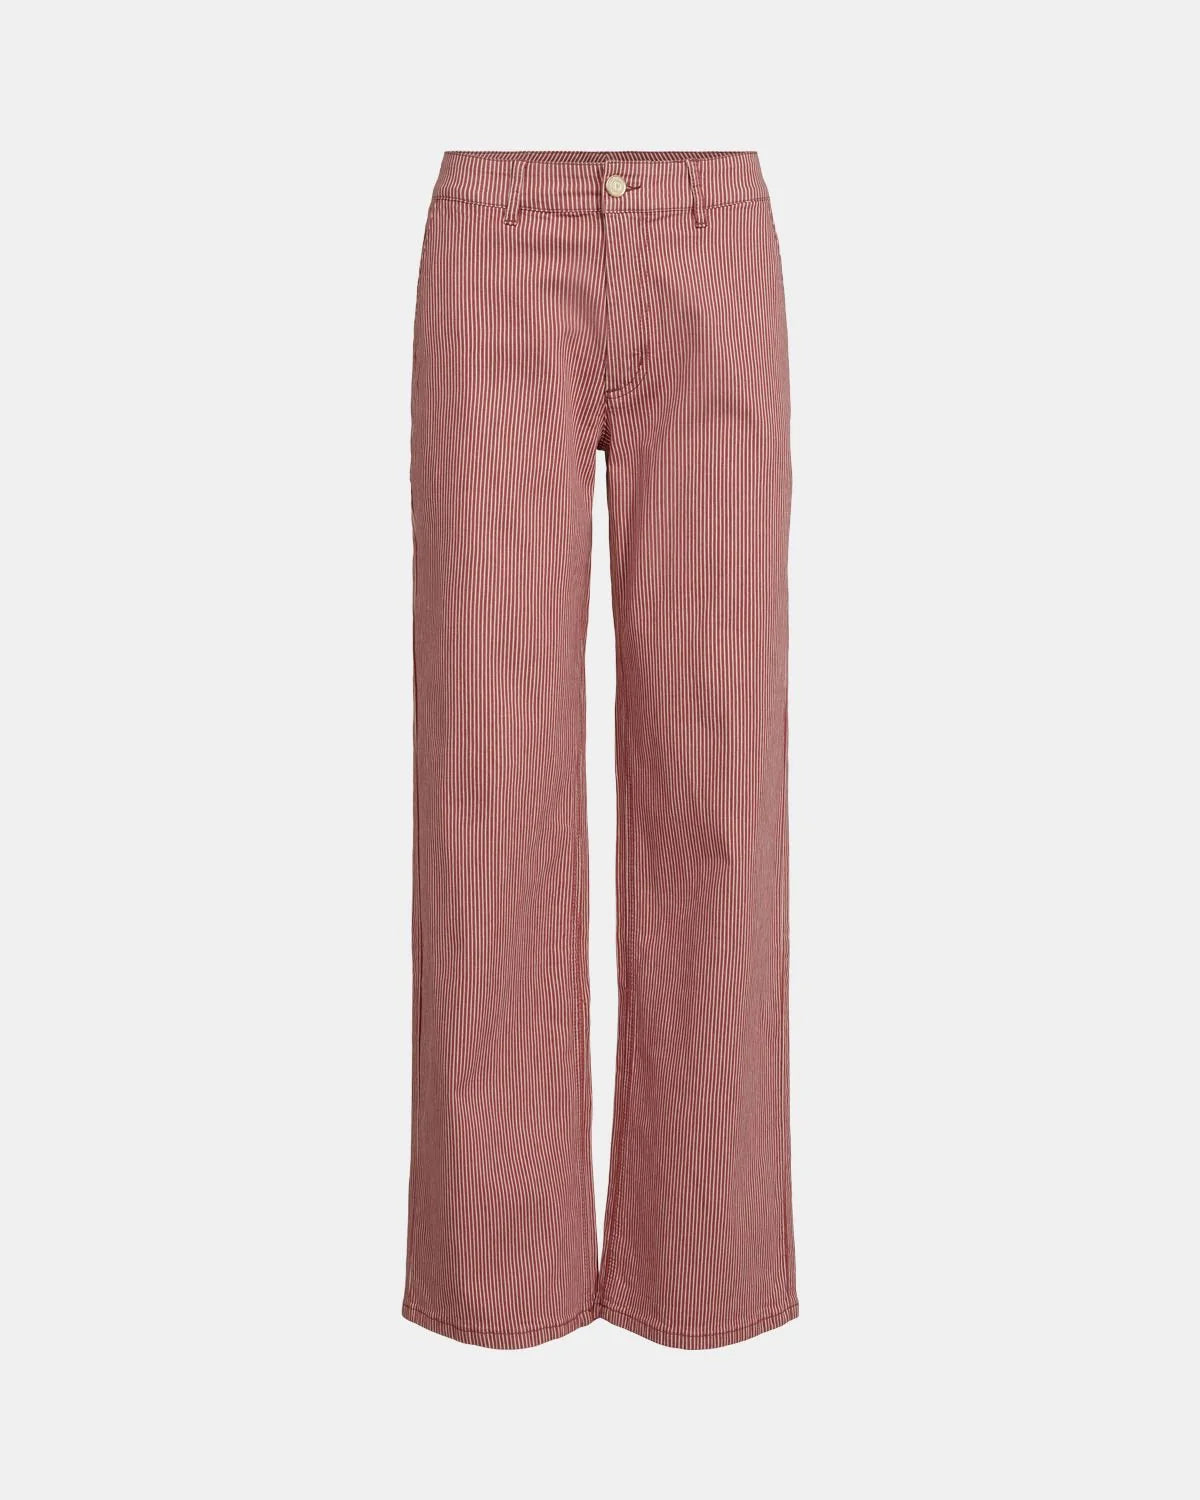 Sofie Schnoor Trousers Red Striped